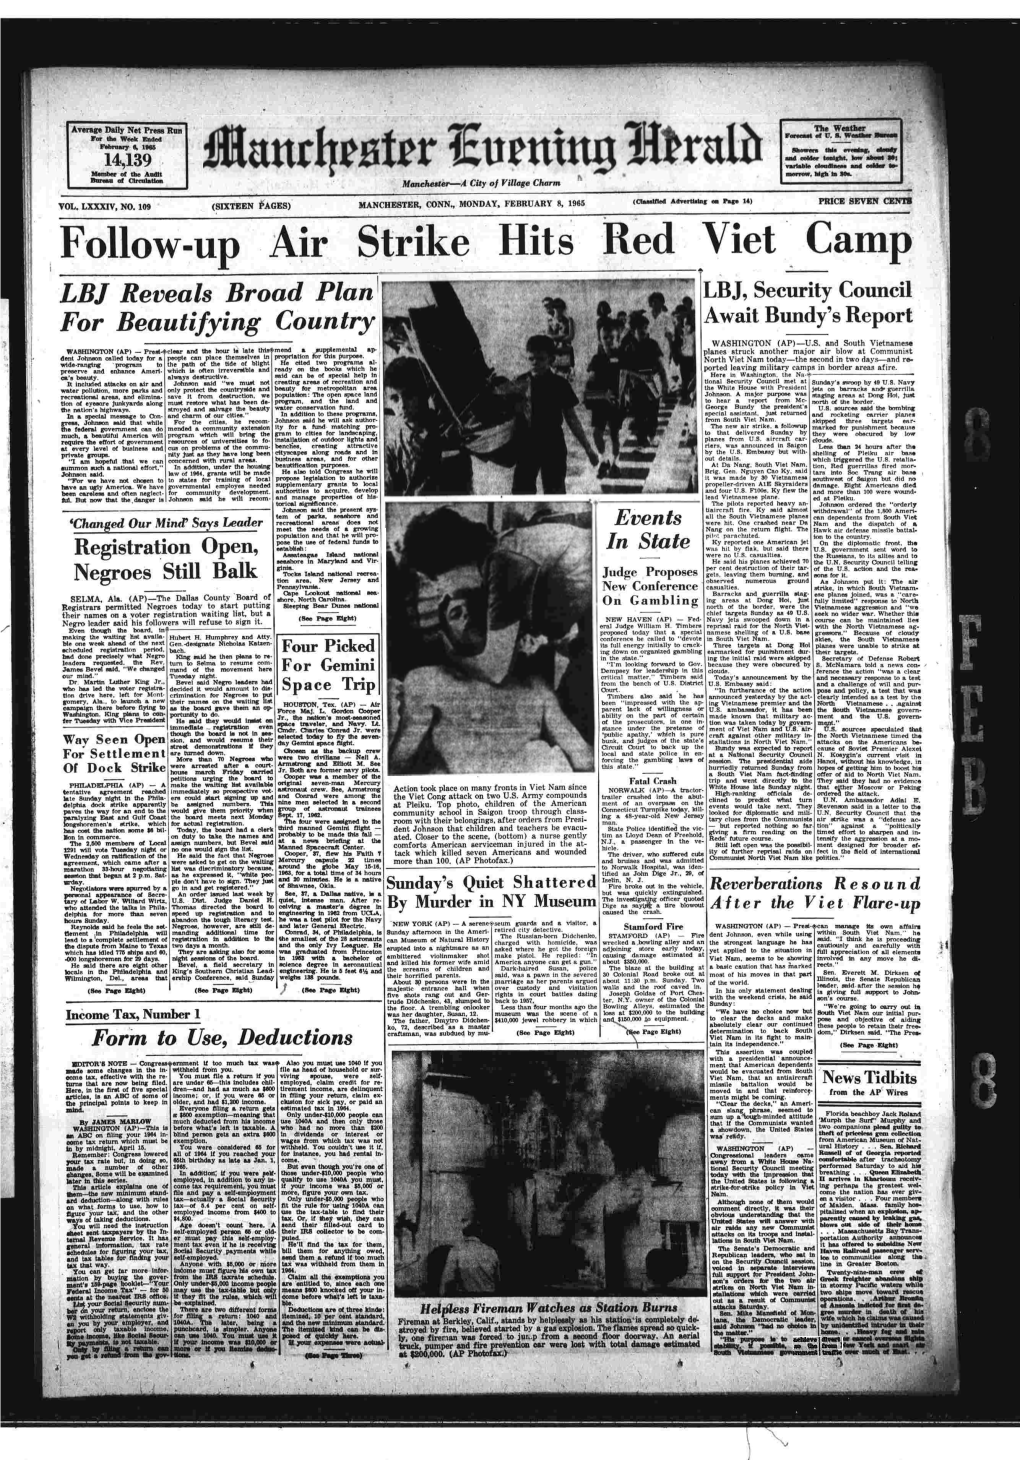 Follow-Up Air Strike Hits Red Viet Camp LBJ Reveals Broad Plan LBJ, Security Council for Beautifying Country Await Bundy’S Report WASHINGTON (A P )— U.S